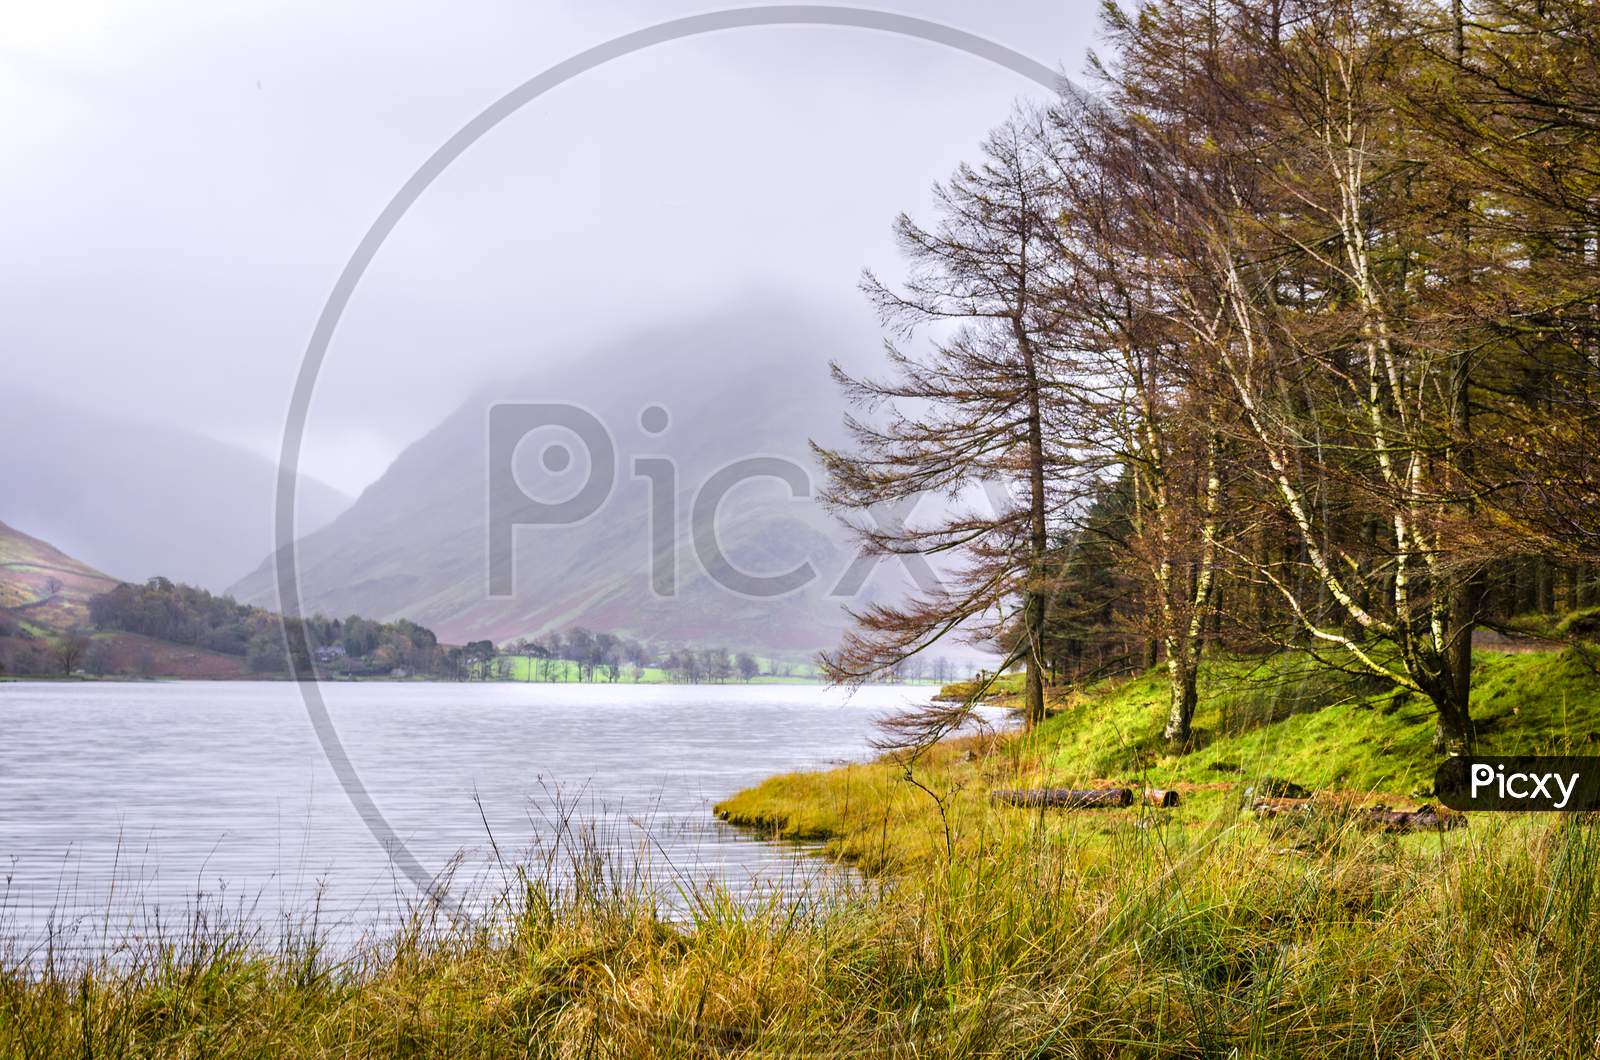 The shore side of Lake Buttermere in the Lake District National Park England.